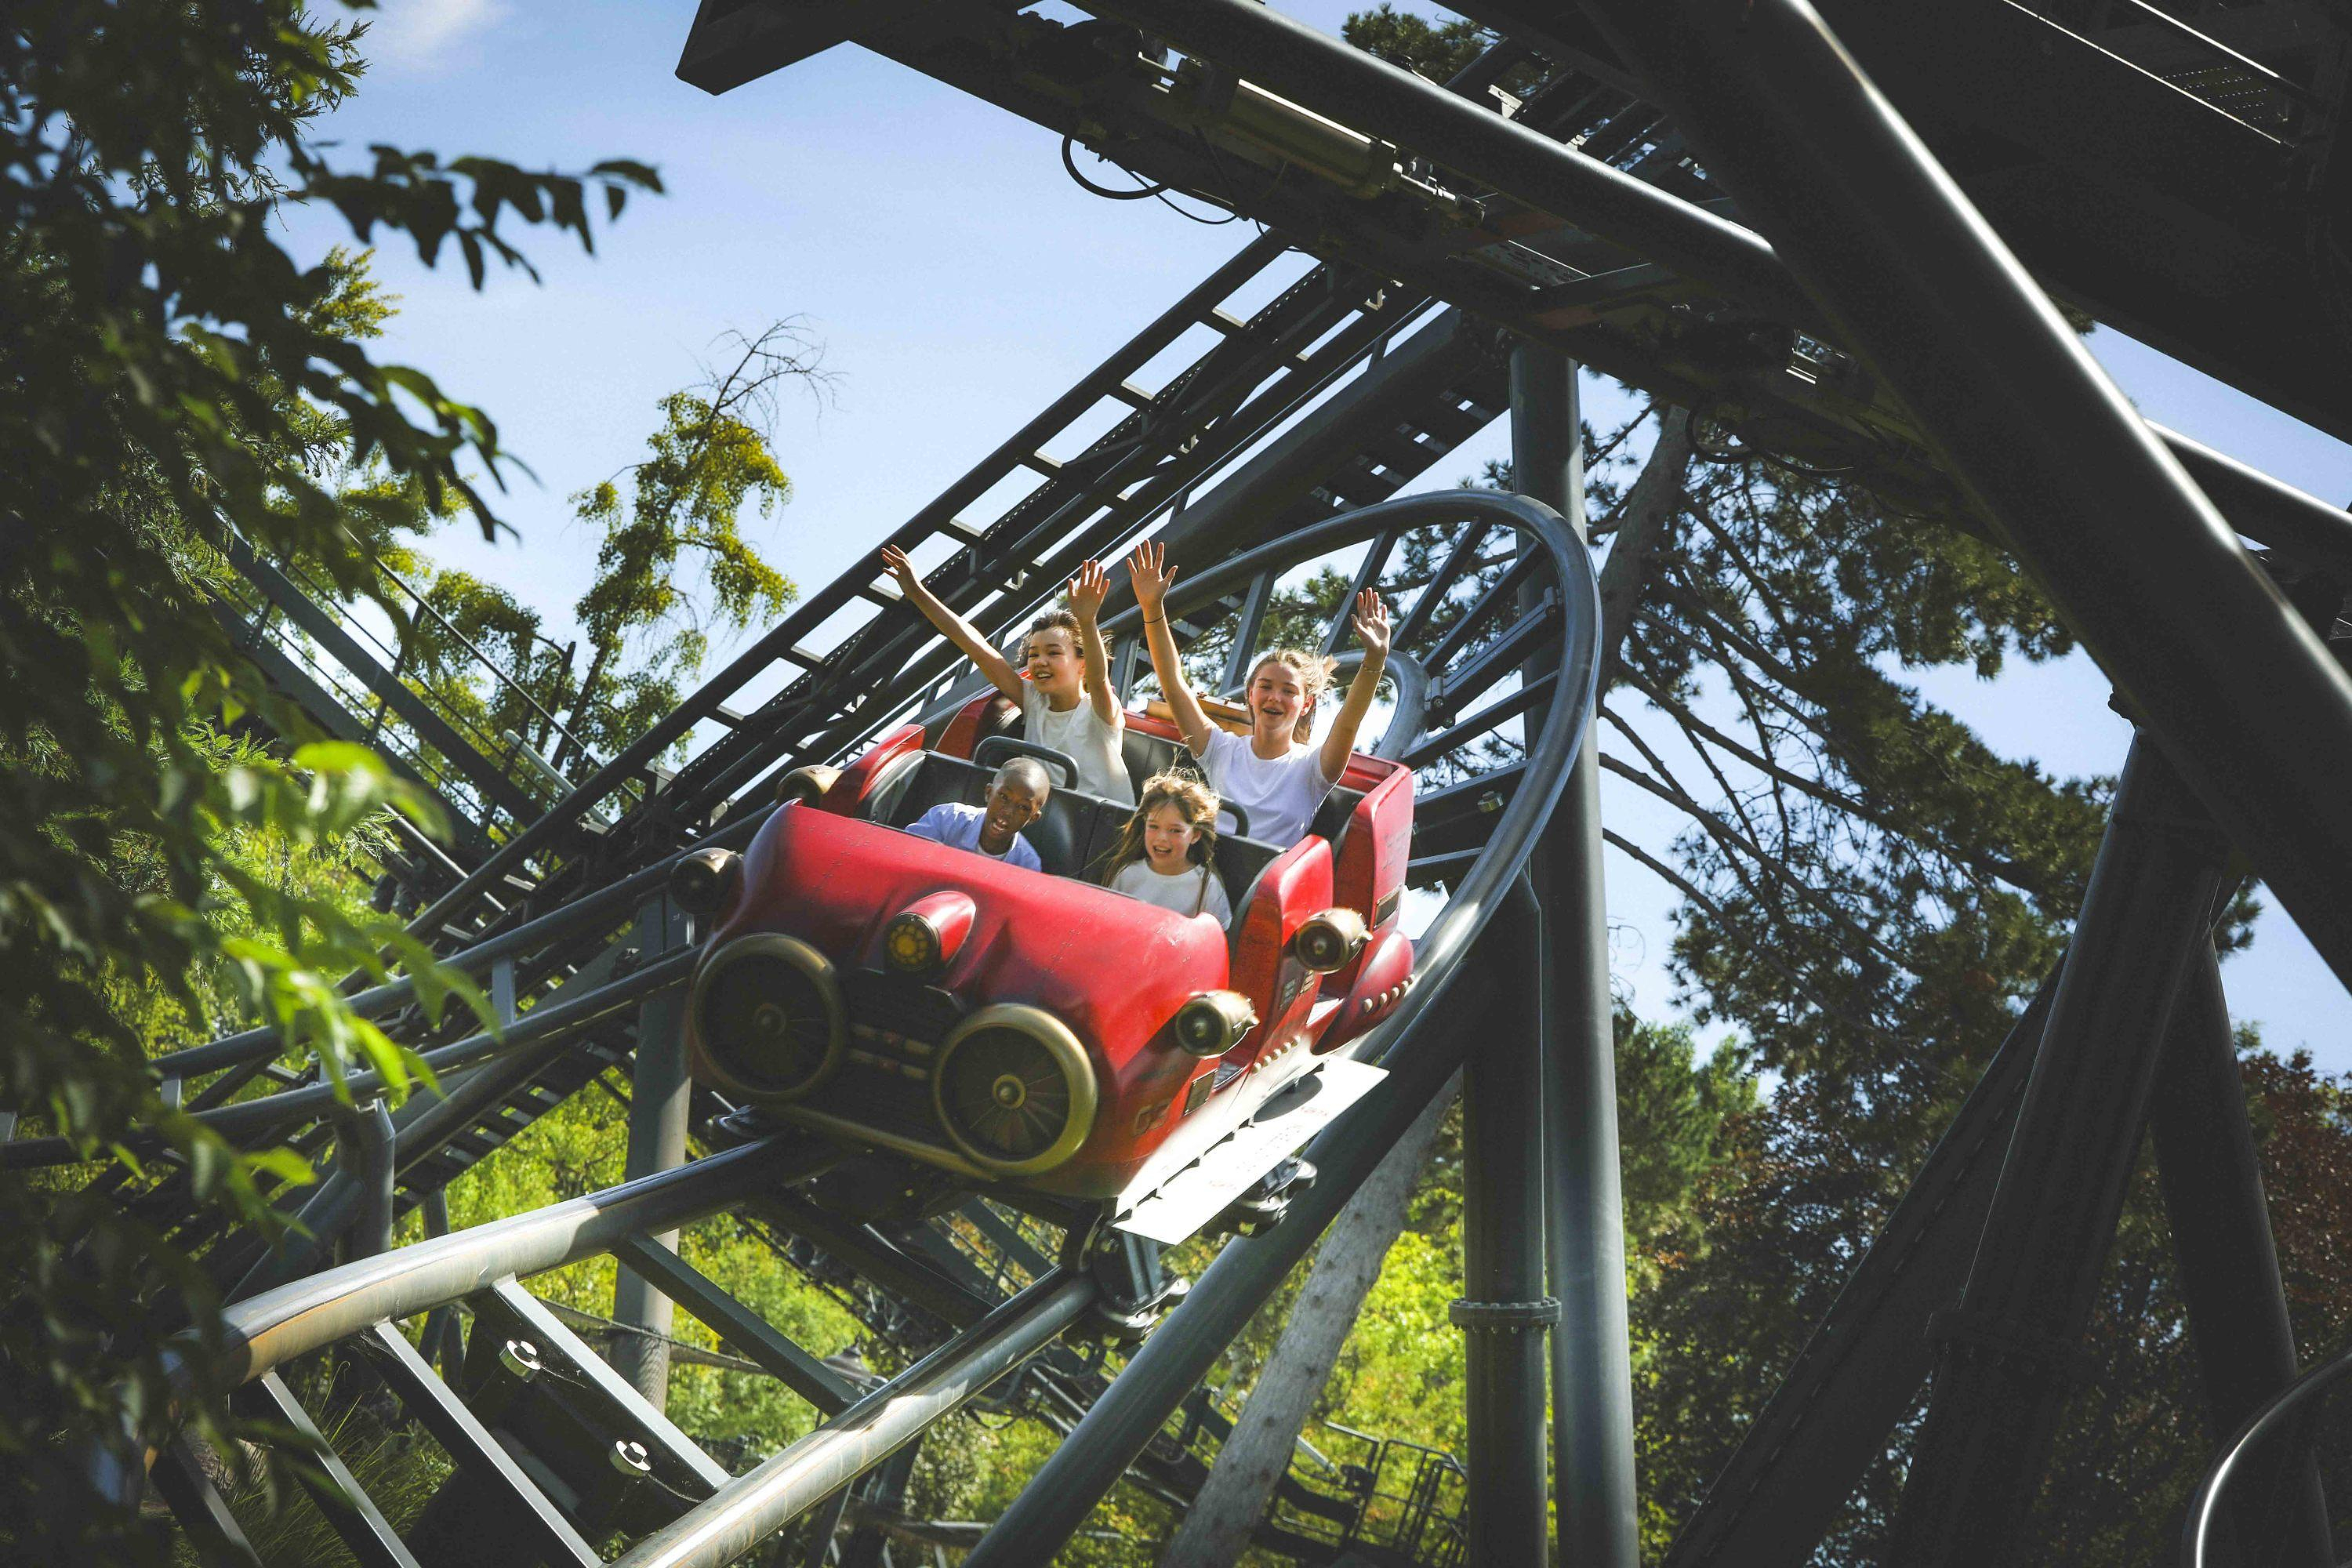 Roller coasters, toboggan runs, interactive games... Le Jardin d’Acclimatation continues to invest to attract crowds